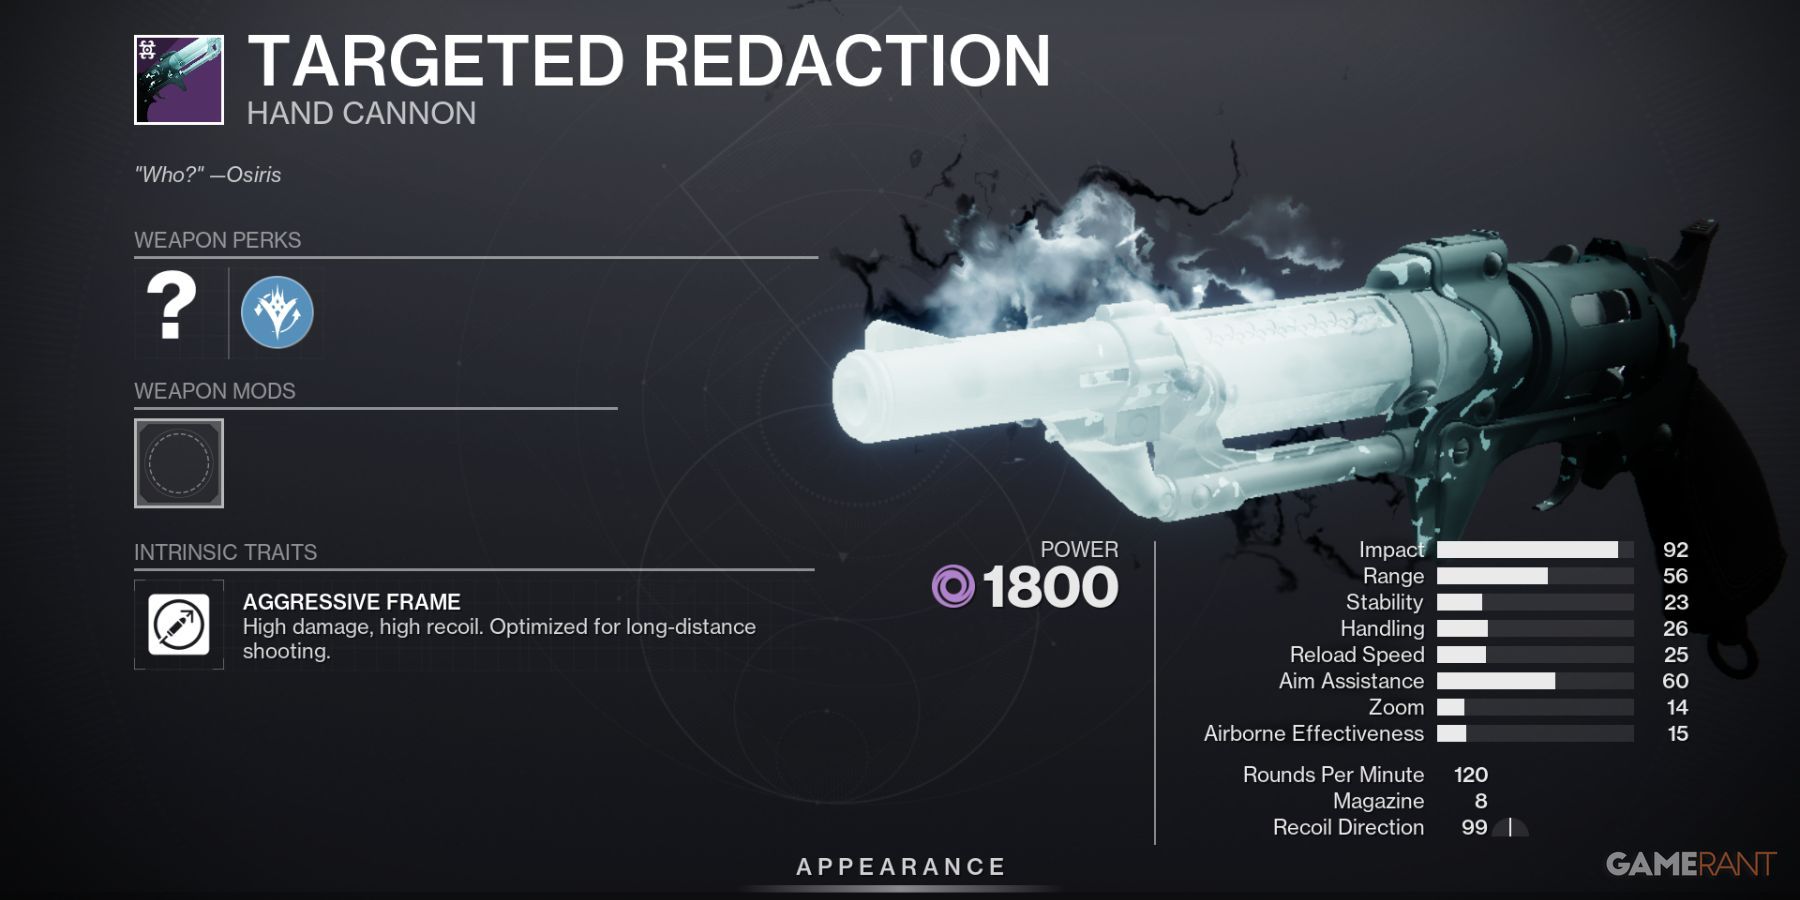 Destiny 2 Targeted Redaction hand cannon